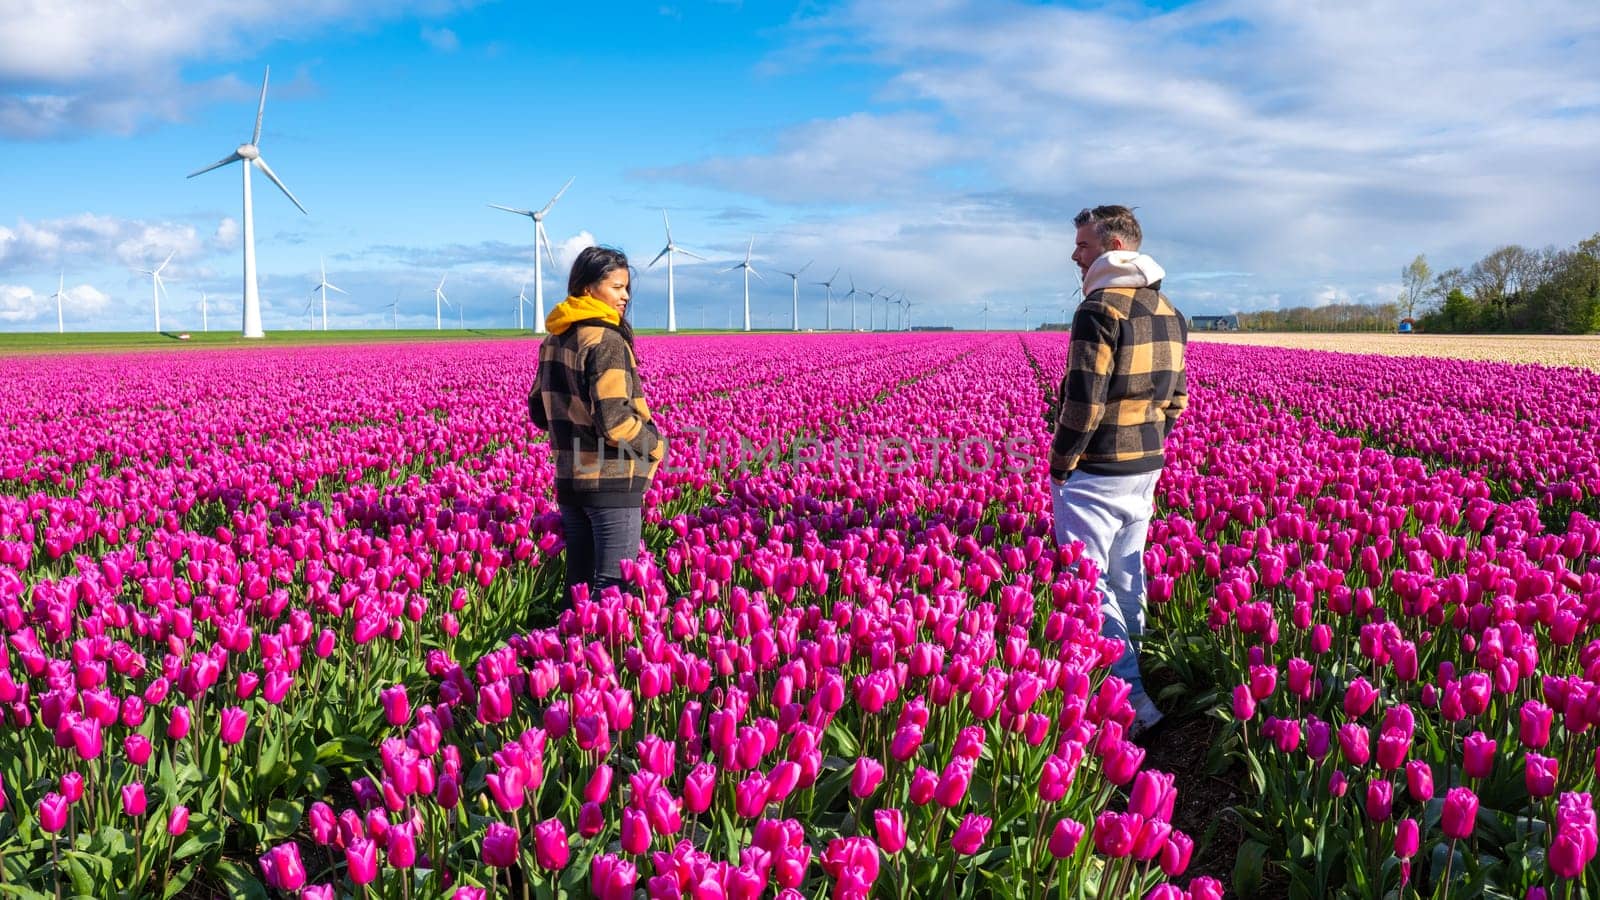 Two men in a sea of purple tulips under the watchful gaze of windmill turbines in the Netherlands in Spring by fokkebok